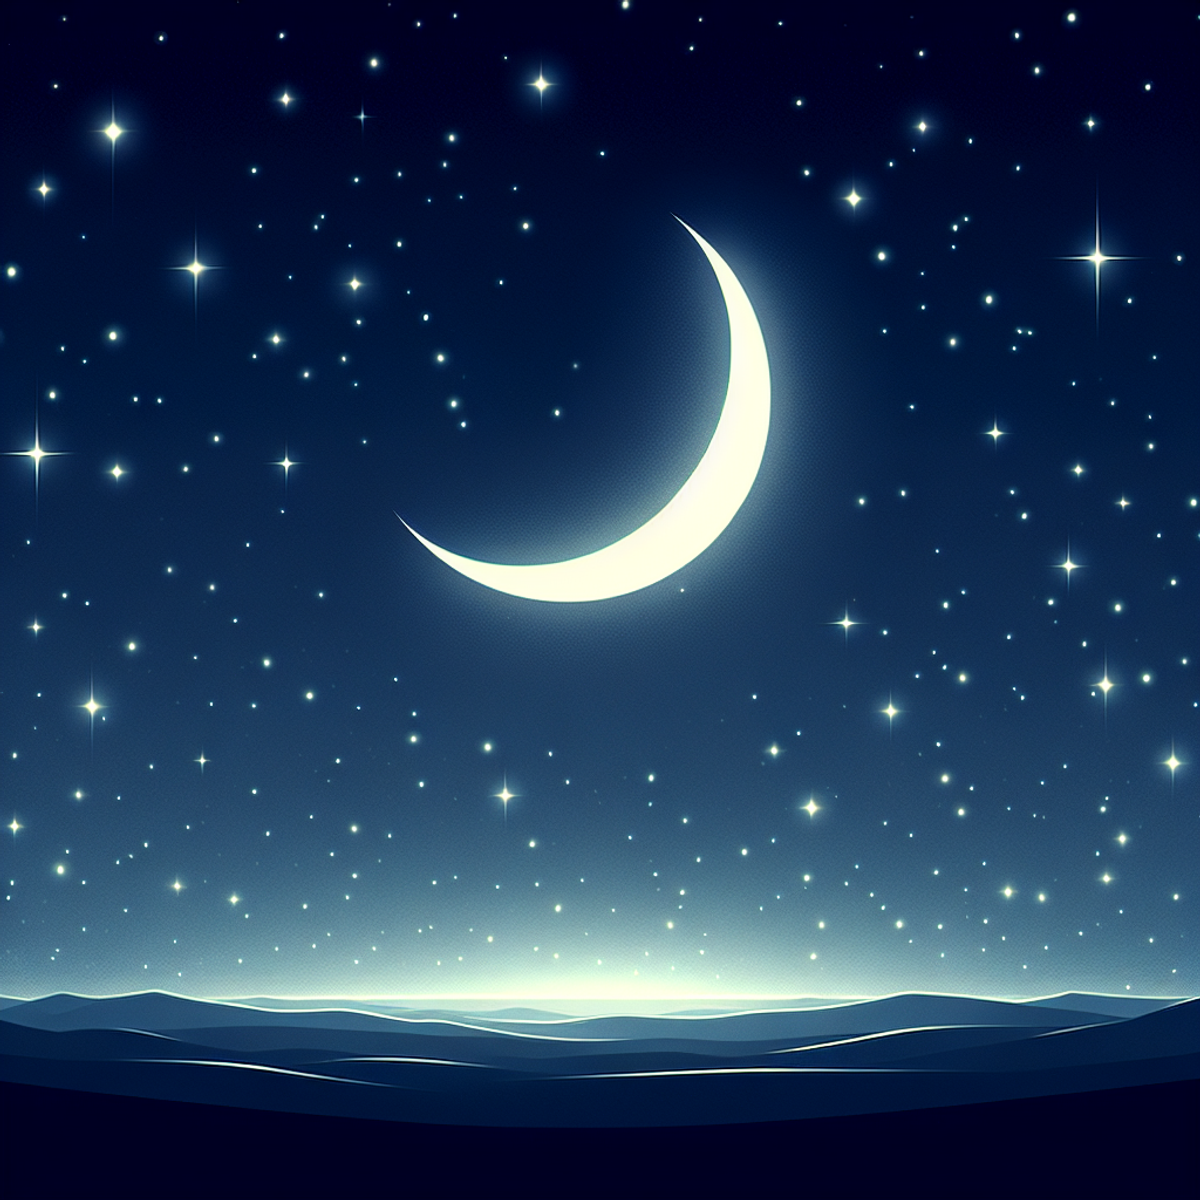 A serene night sky with a thin crescent moon and numerous stars.